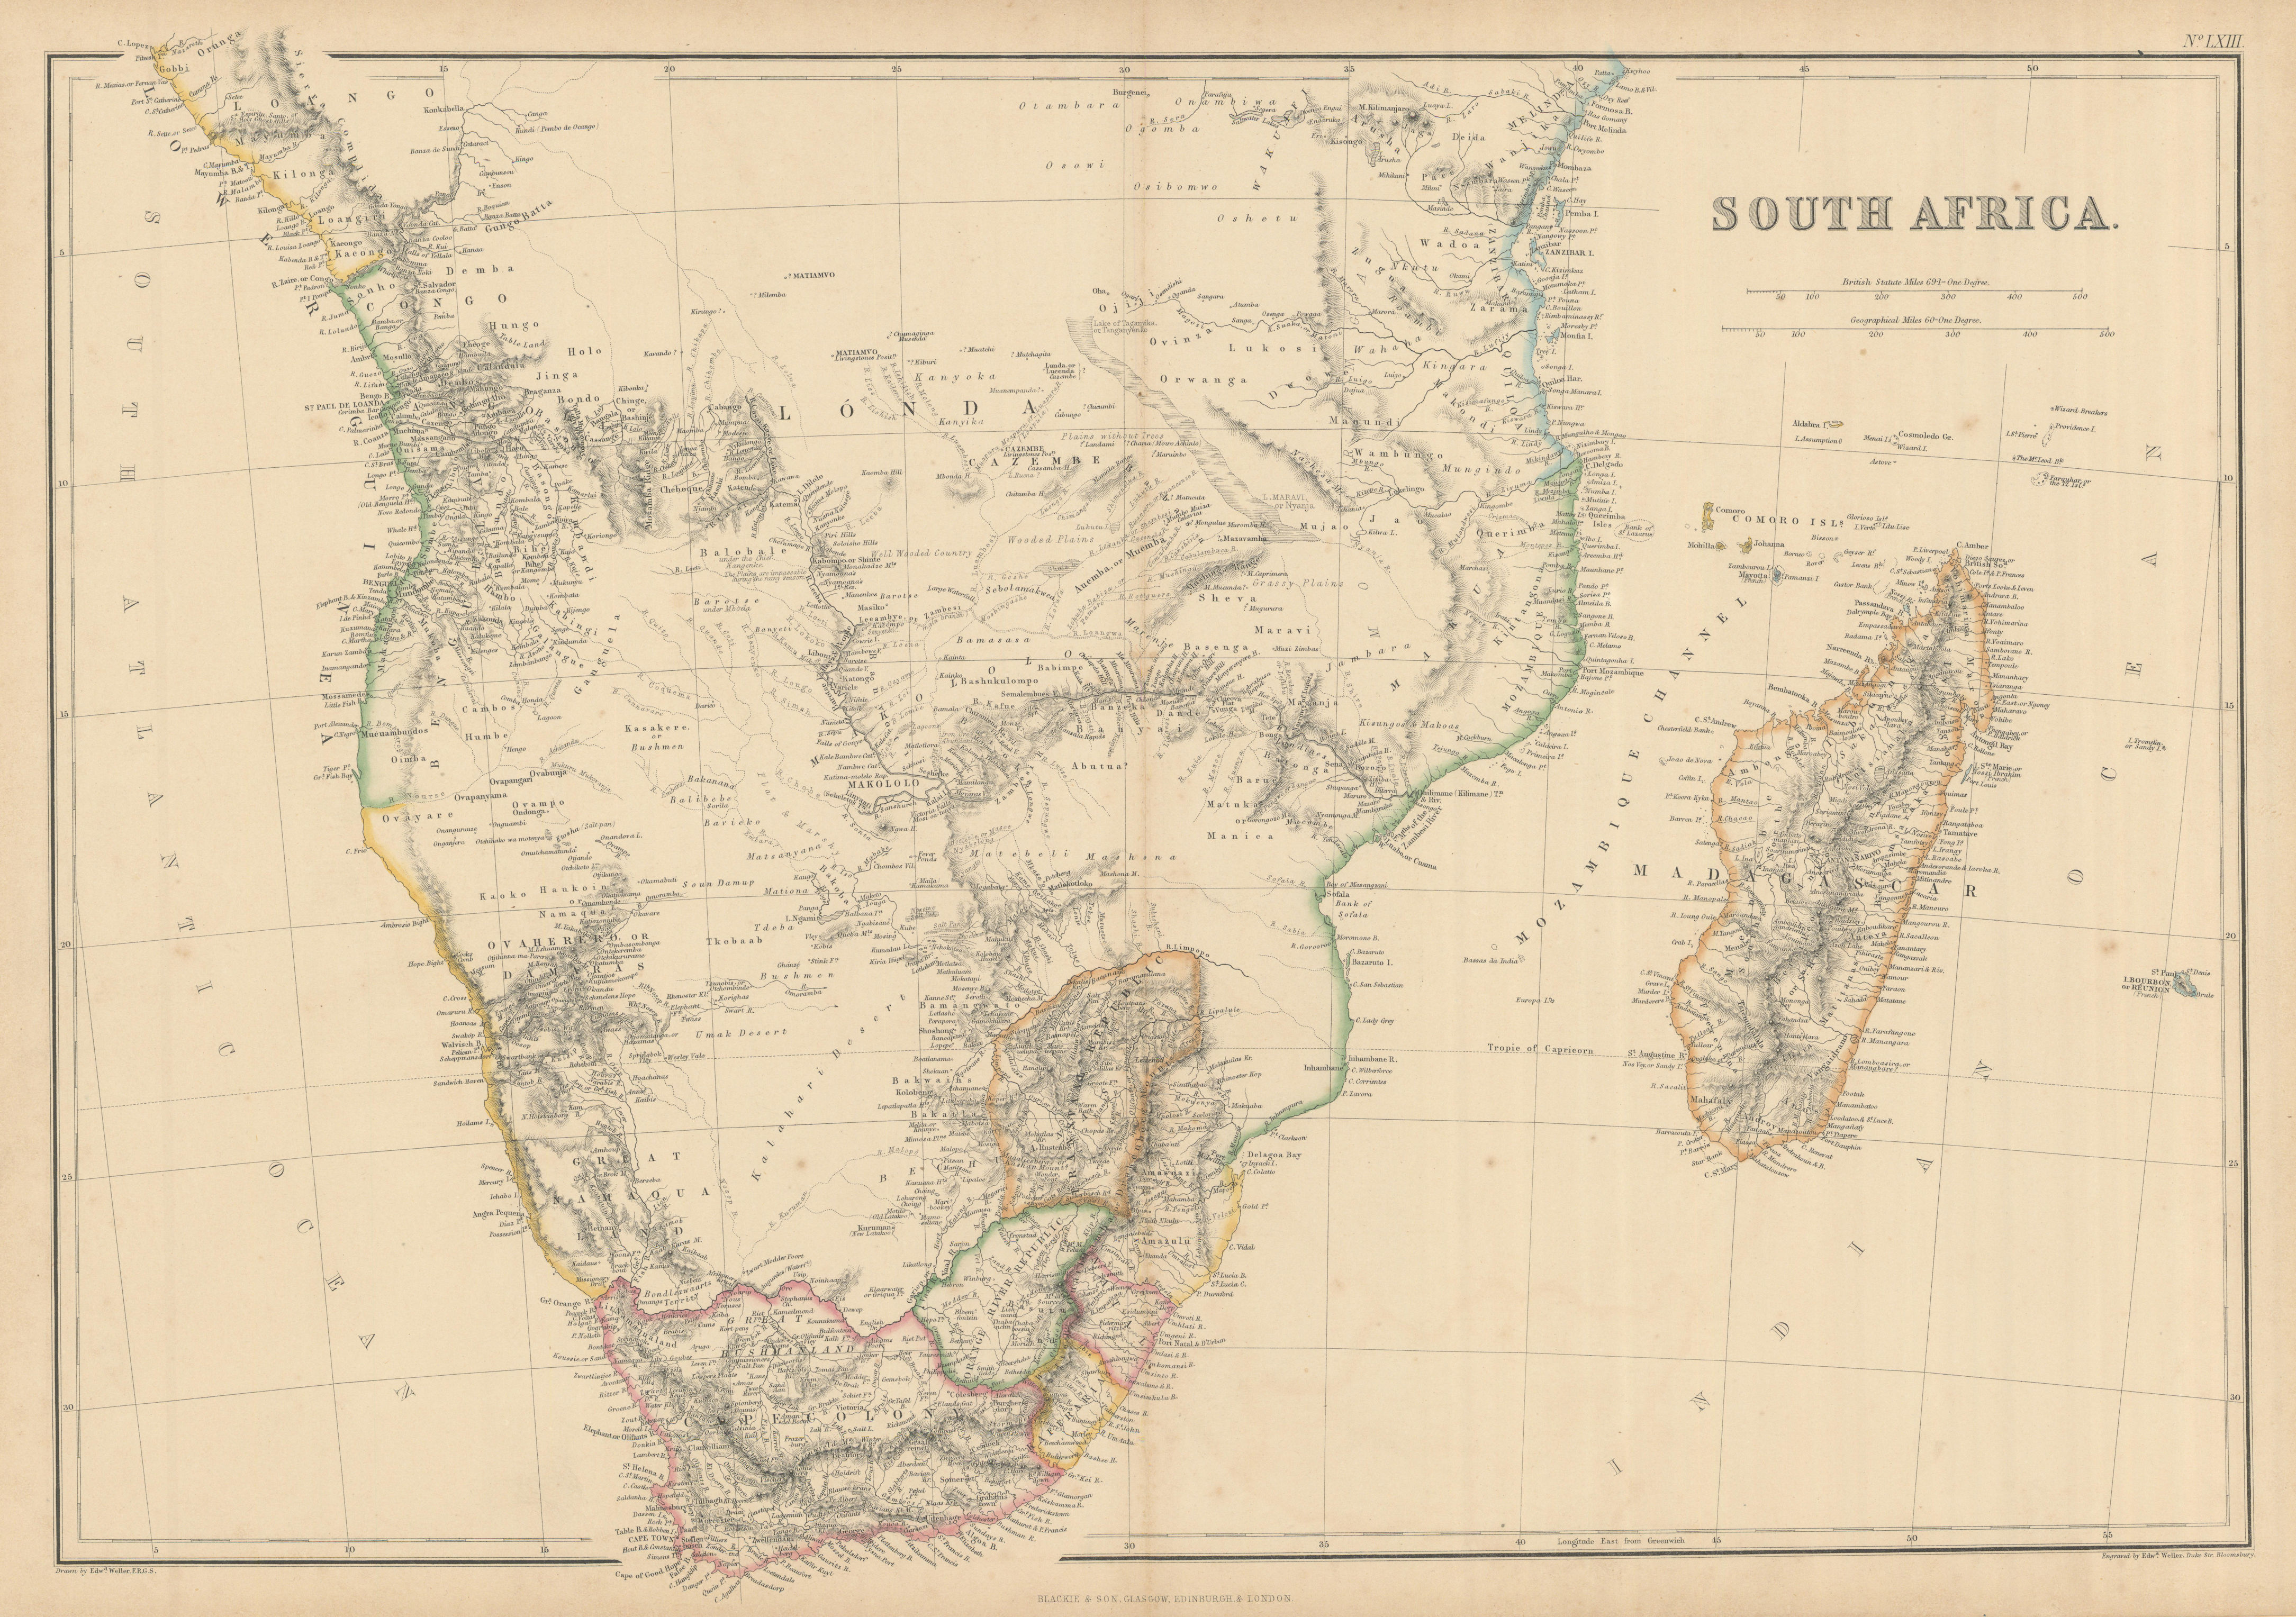 Associate Product Southern Africa & Madagascar by Edward Weller 1860 old antique map plan chart